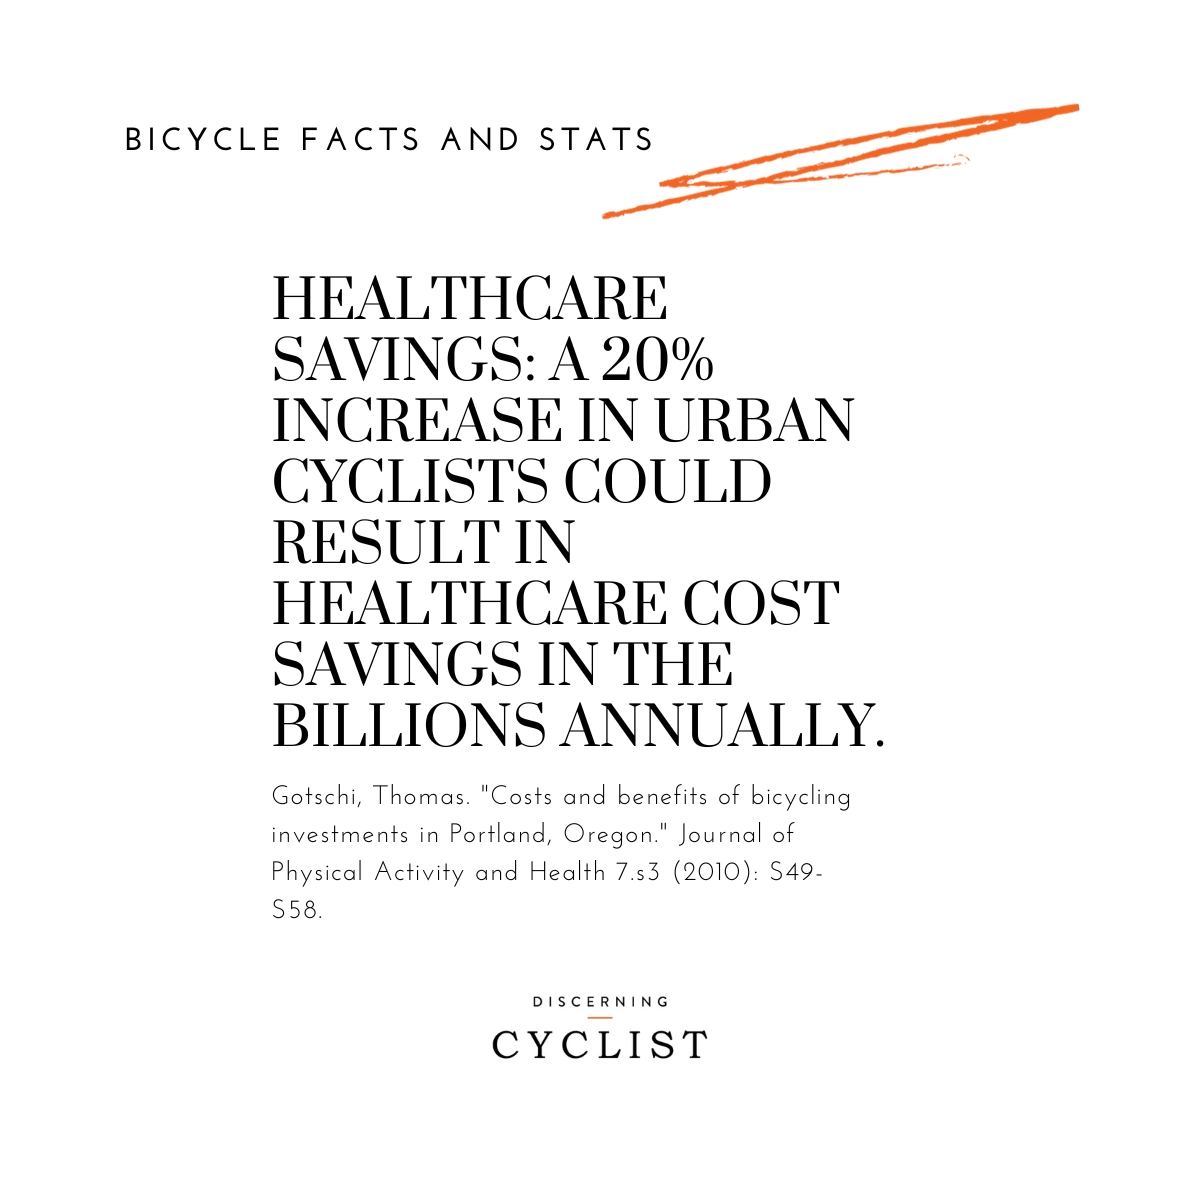 Healthcare Savings: A 20% increase in urban cyclists could result in healthcare cost savings in the billions annually.